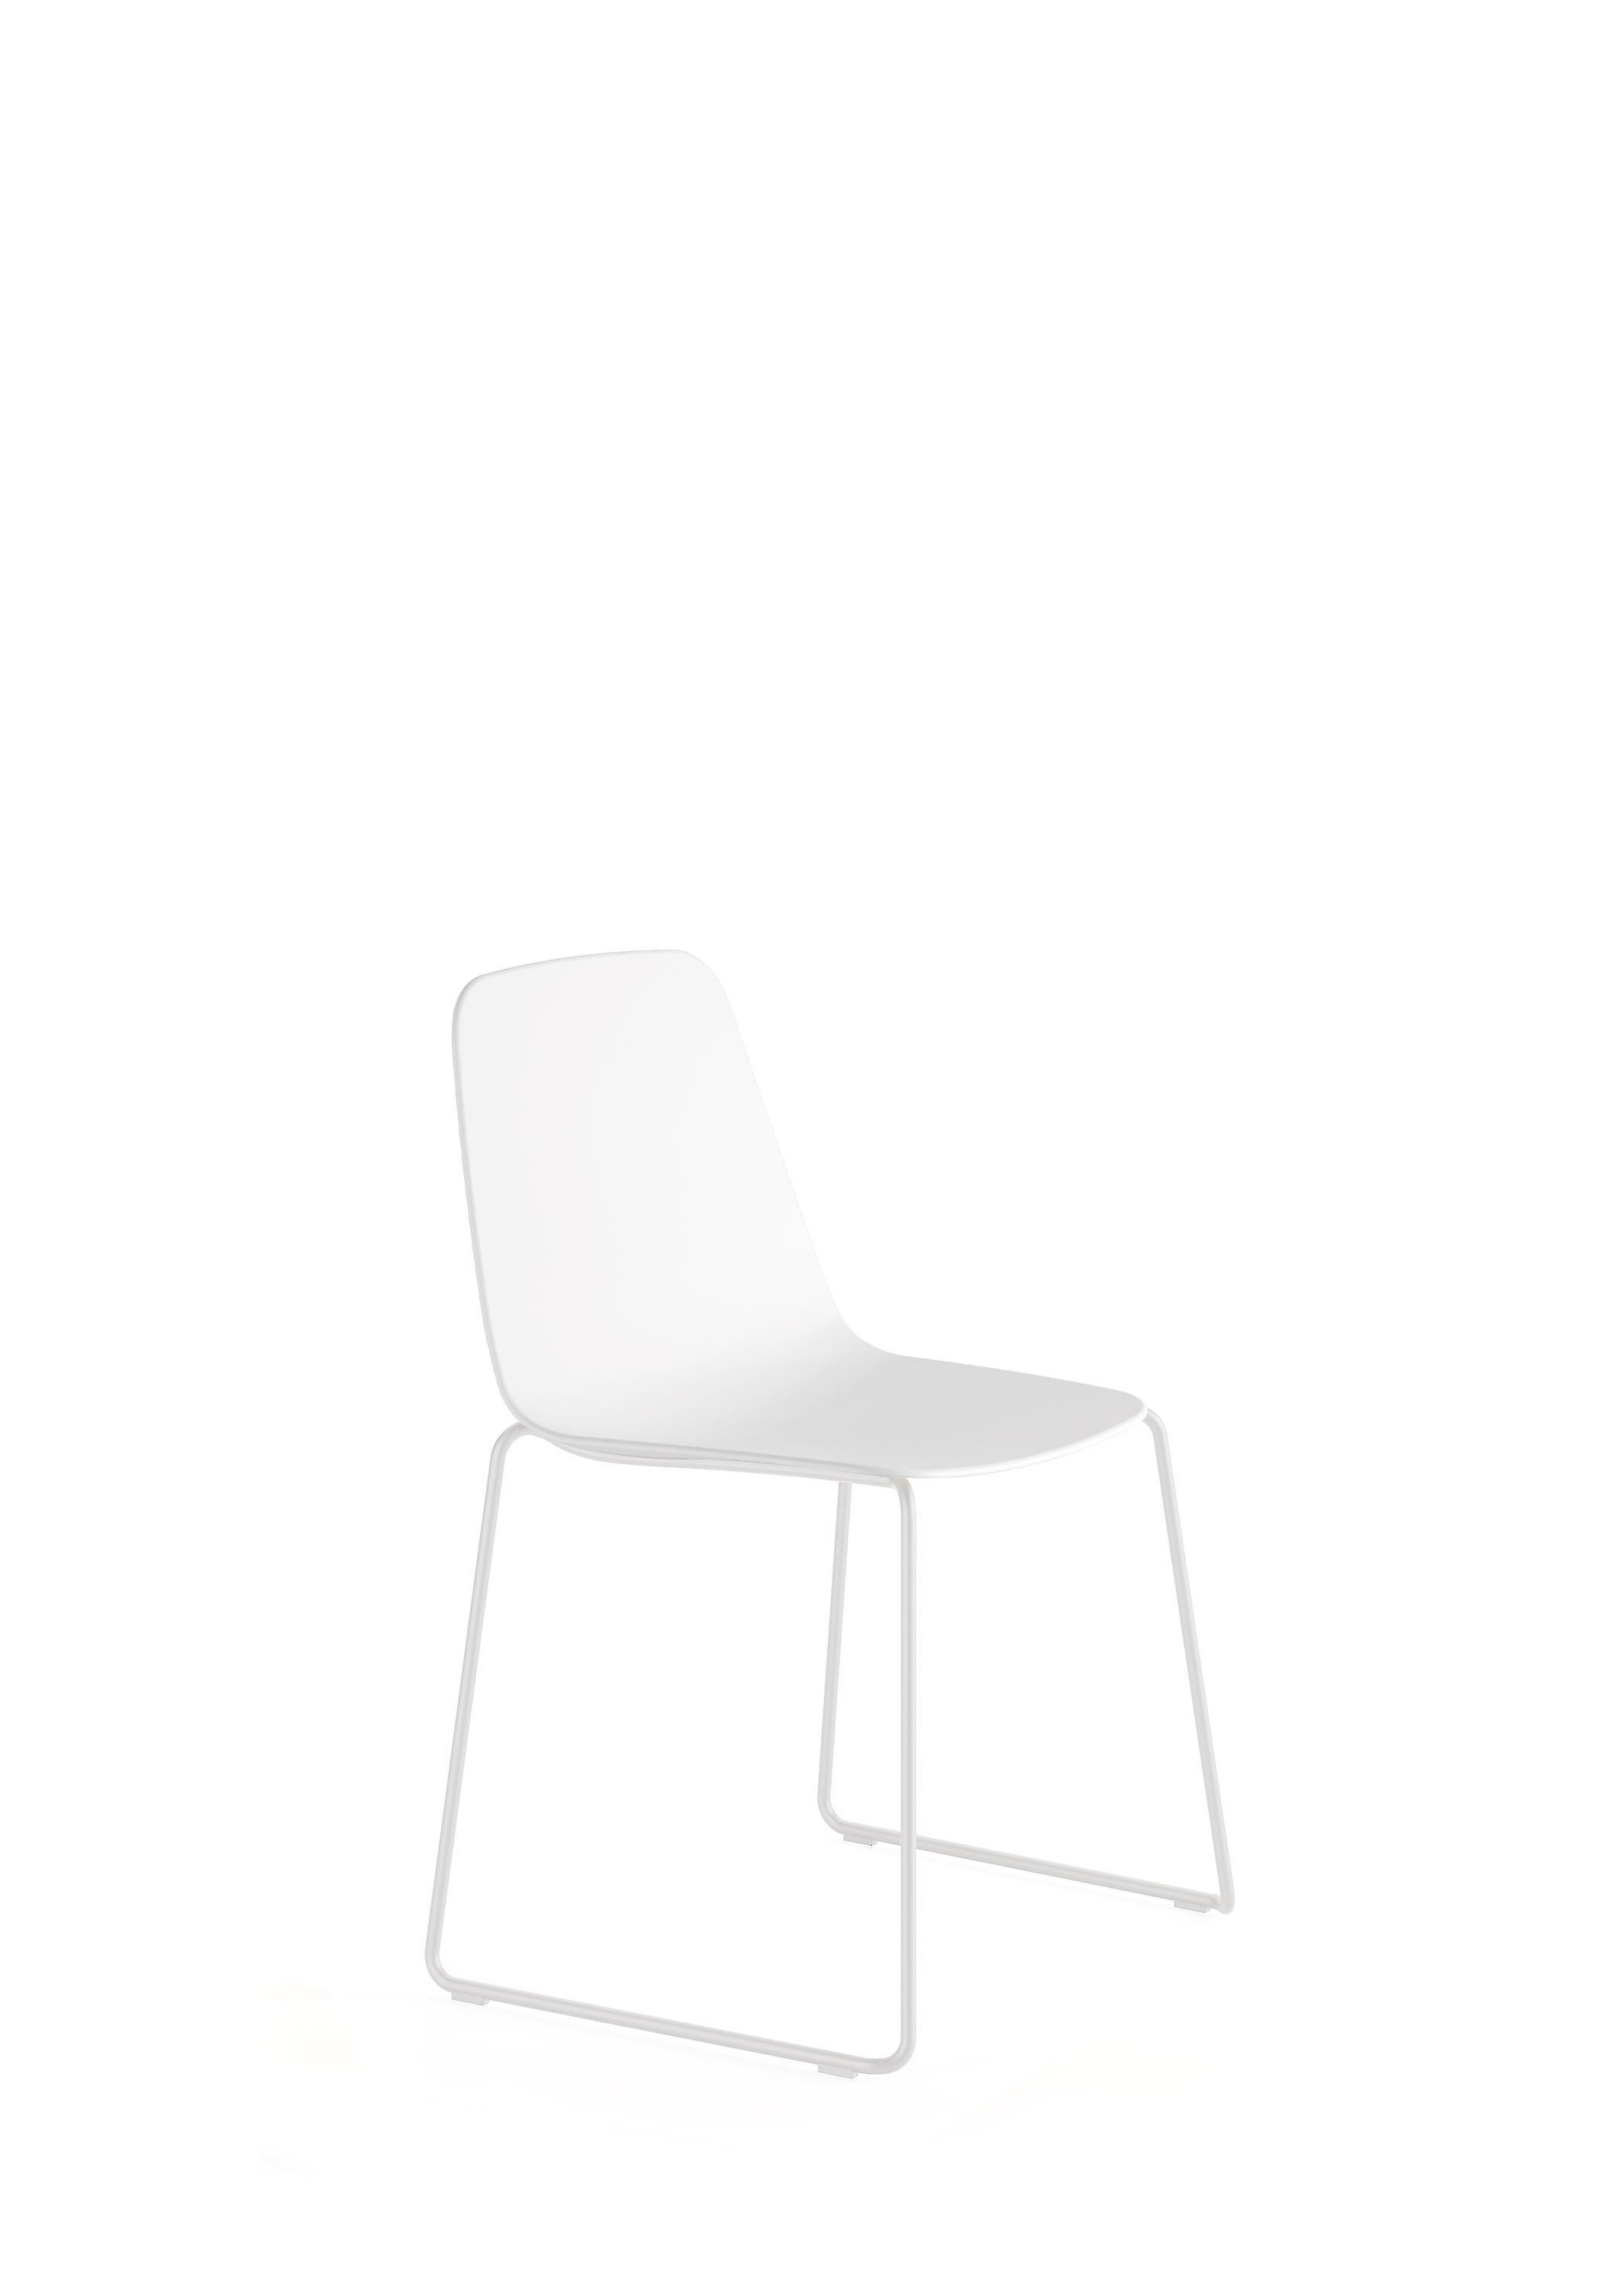 The powder coated steel tube structure and the carefully made, elegant seat of the Maarten chair recall the classics of the 1970s.

Injected polypropylene seat in white. 
Calibrated steel structure powder coated in thermoreinforced polyester in